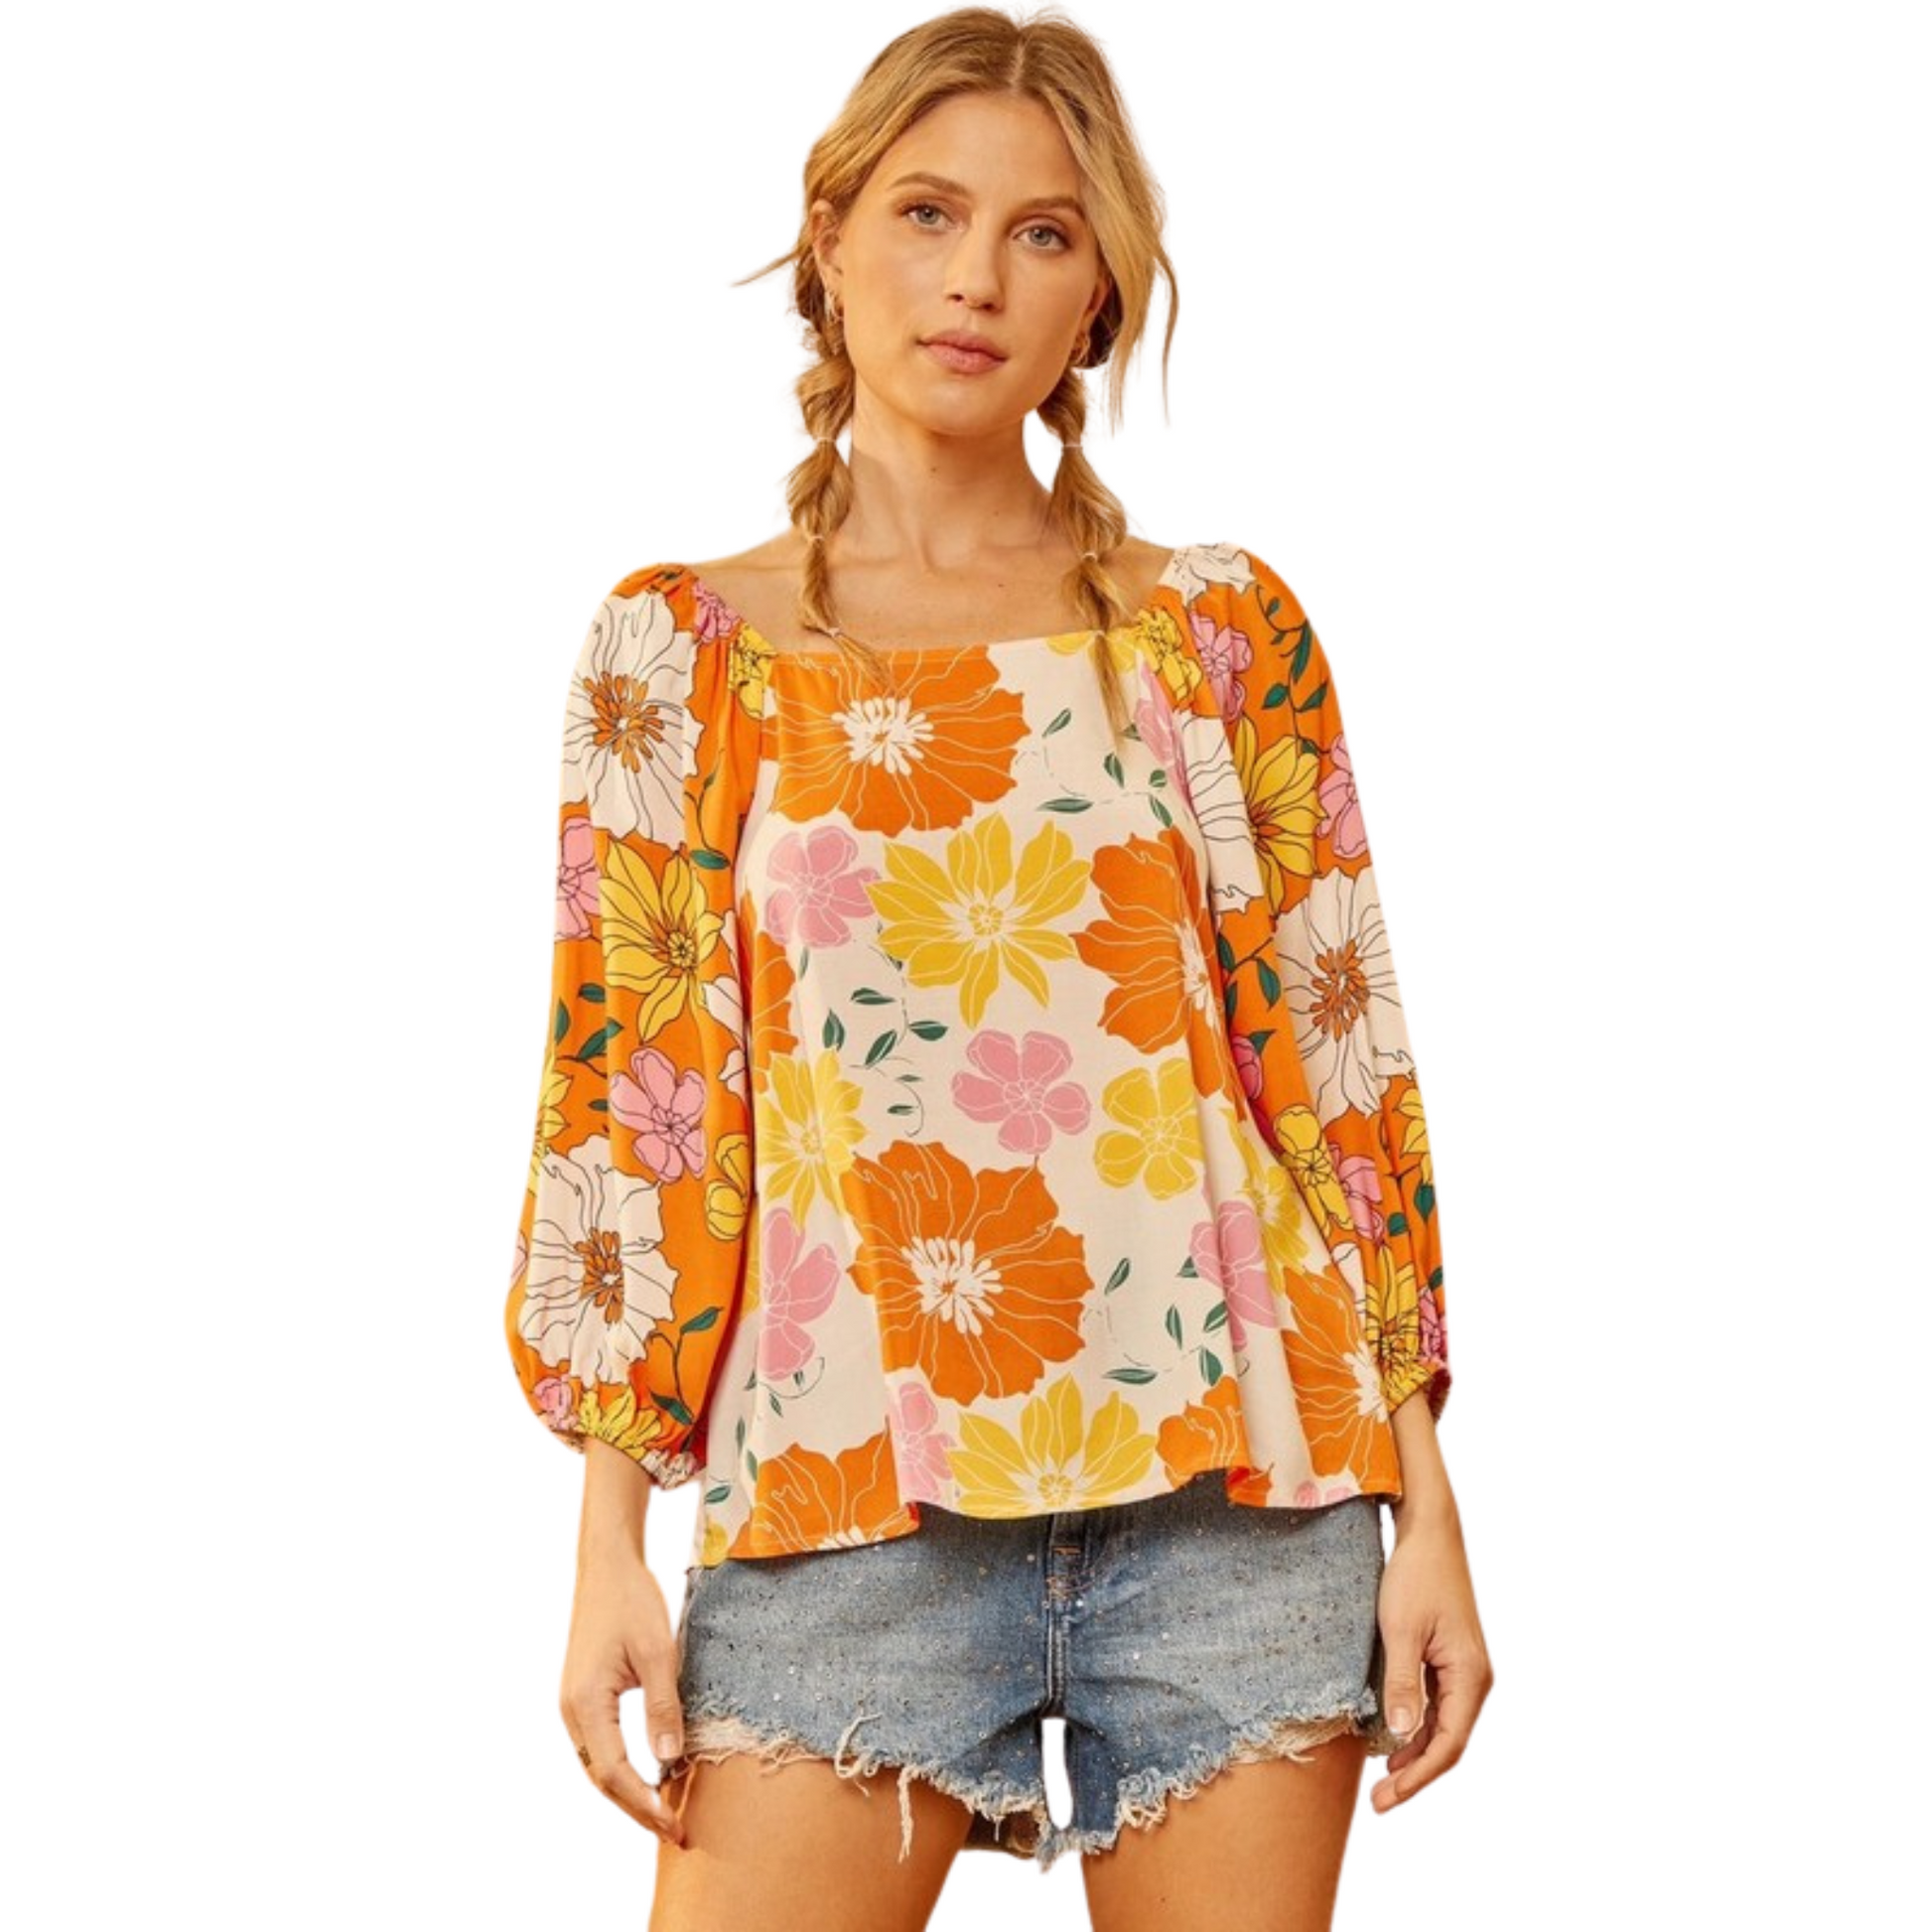 This square-neck top combines retro style with a bright and cheerful floral pattern. The lightweight fabric is perfect for warm-weather days, and the 3/4 length sleeves let you stay cool without sacrificing style. With shades of yellow and orange, it's sure to make a statement.